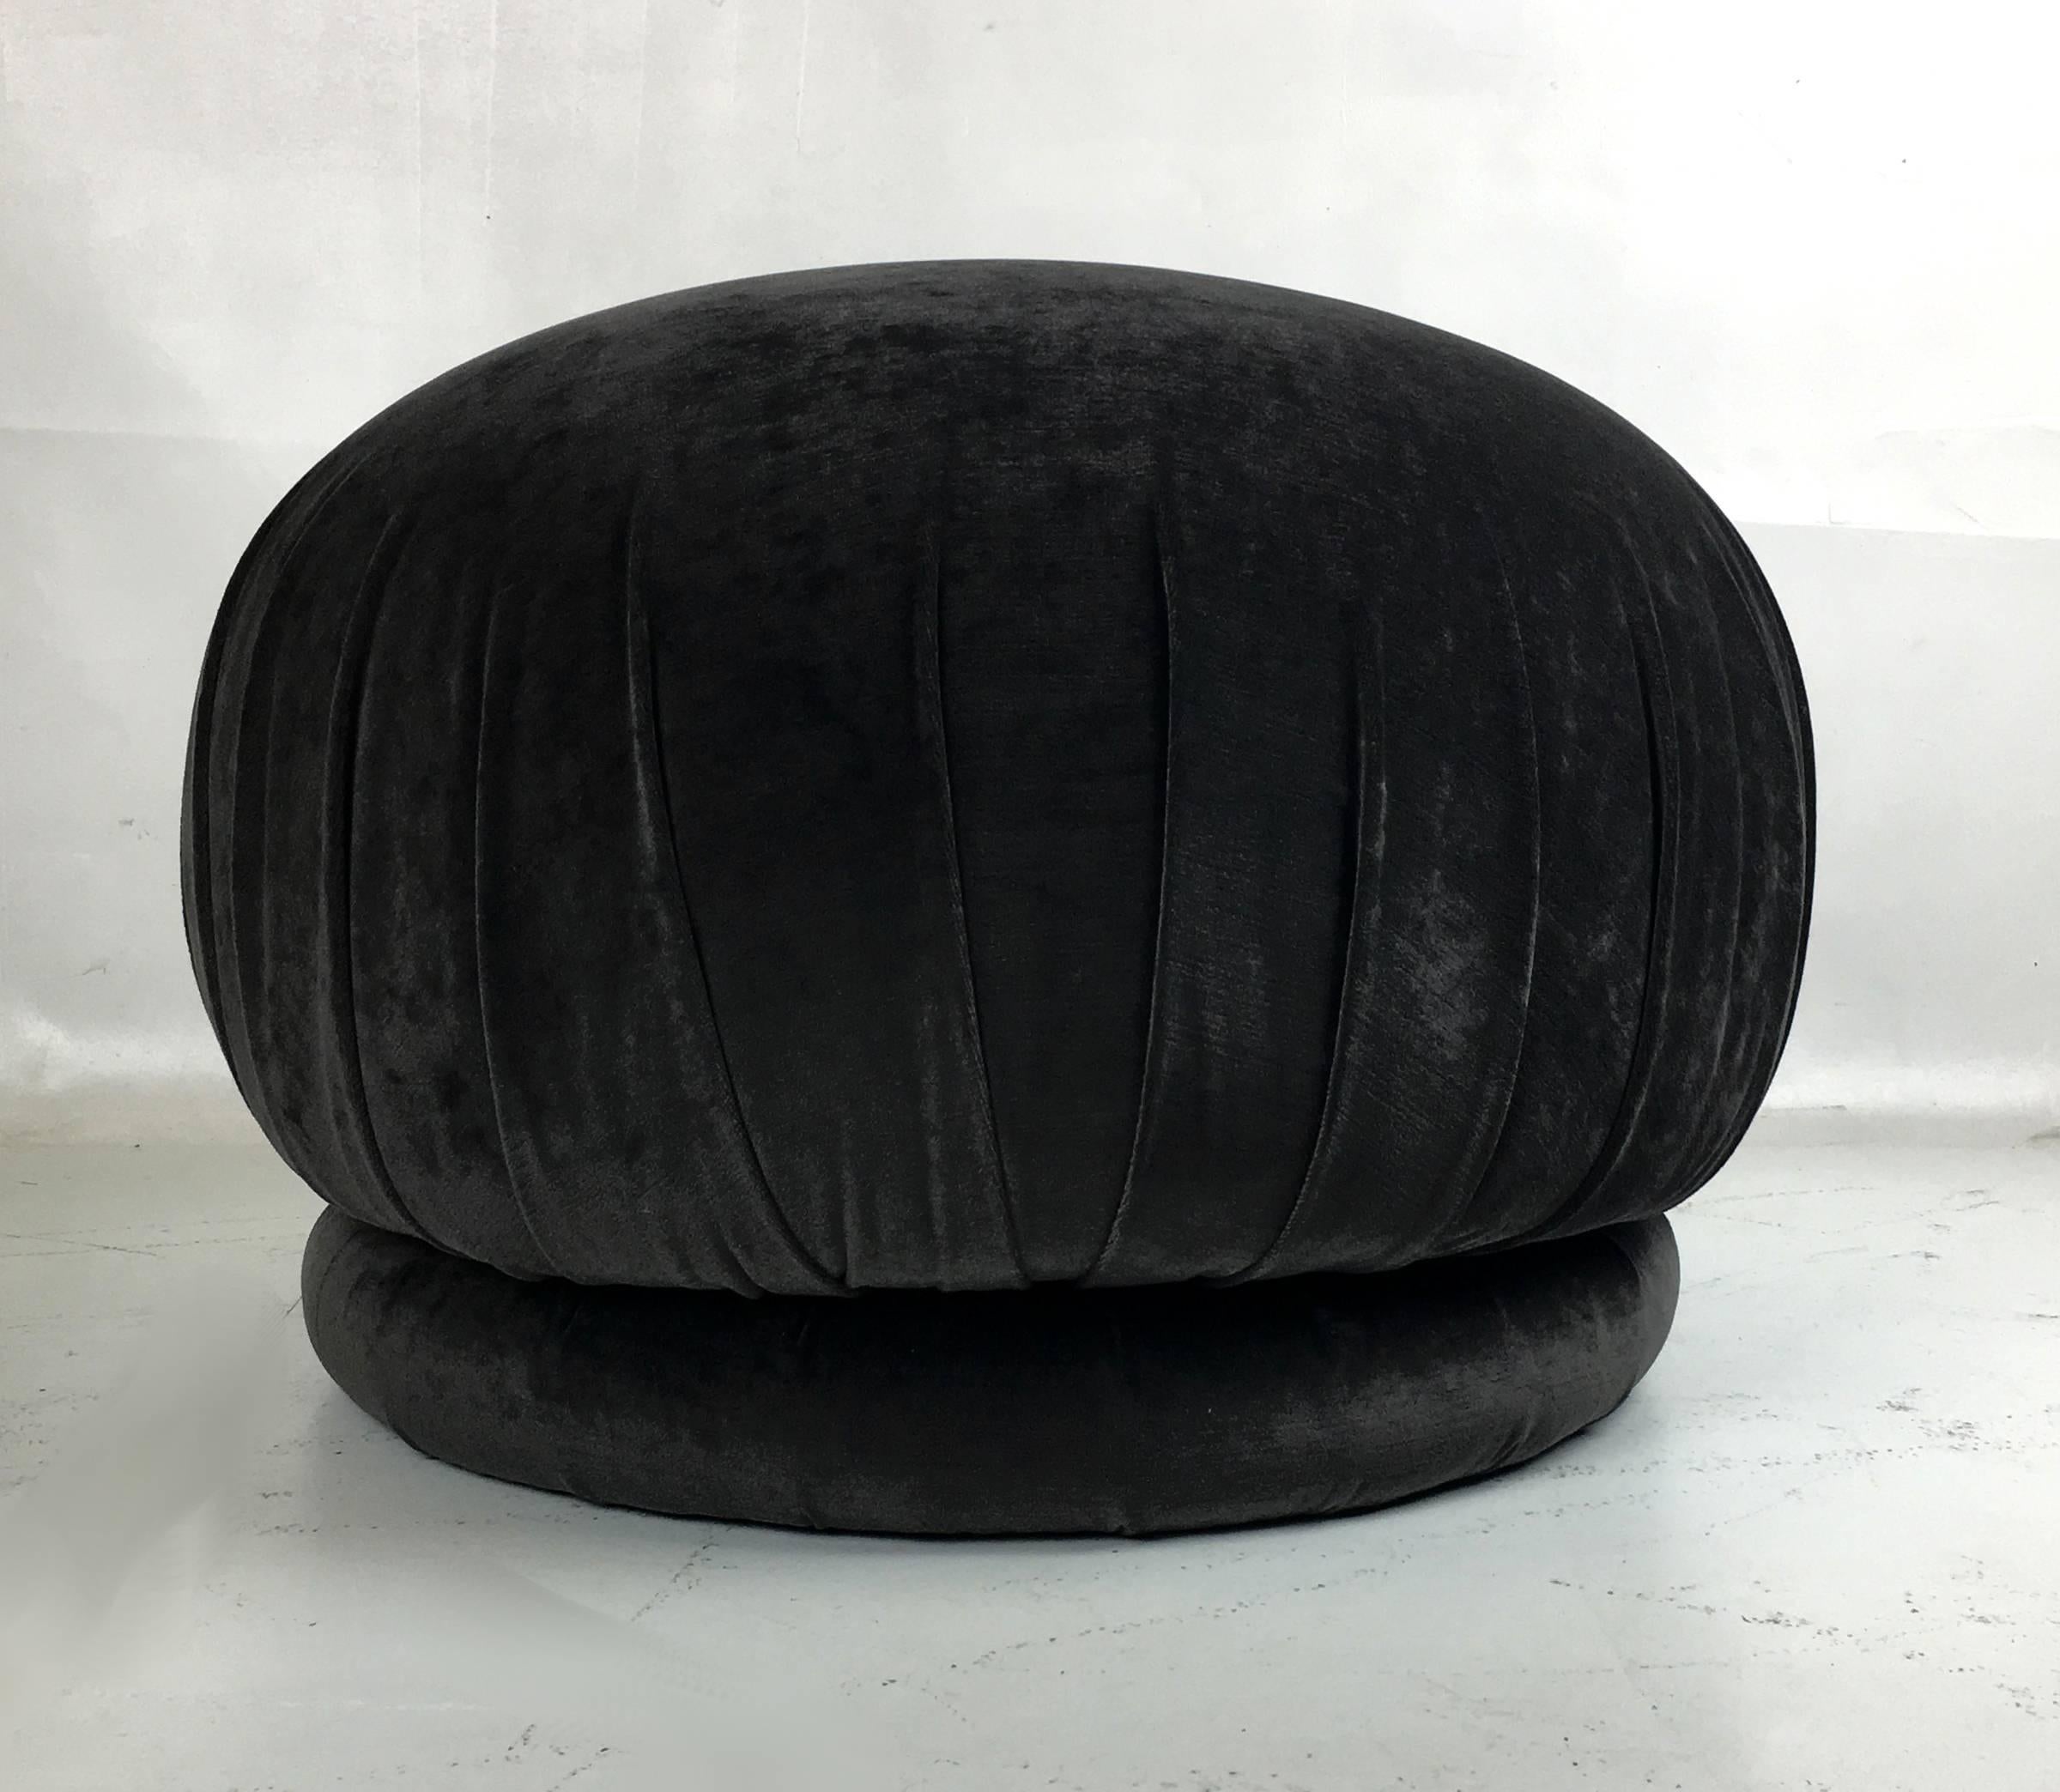 Pair of velvet poufs by Vladimir Kagan for Directional. These well-padded sculptural seats are just the thing for stylish pull-up occasional seating. Quality construction and design by Directional. Directional Furniture championed most of the great